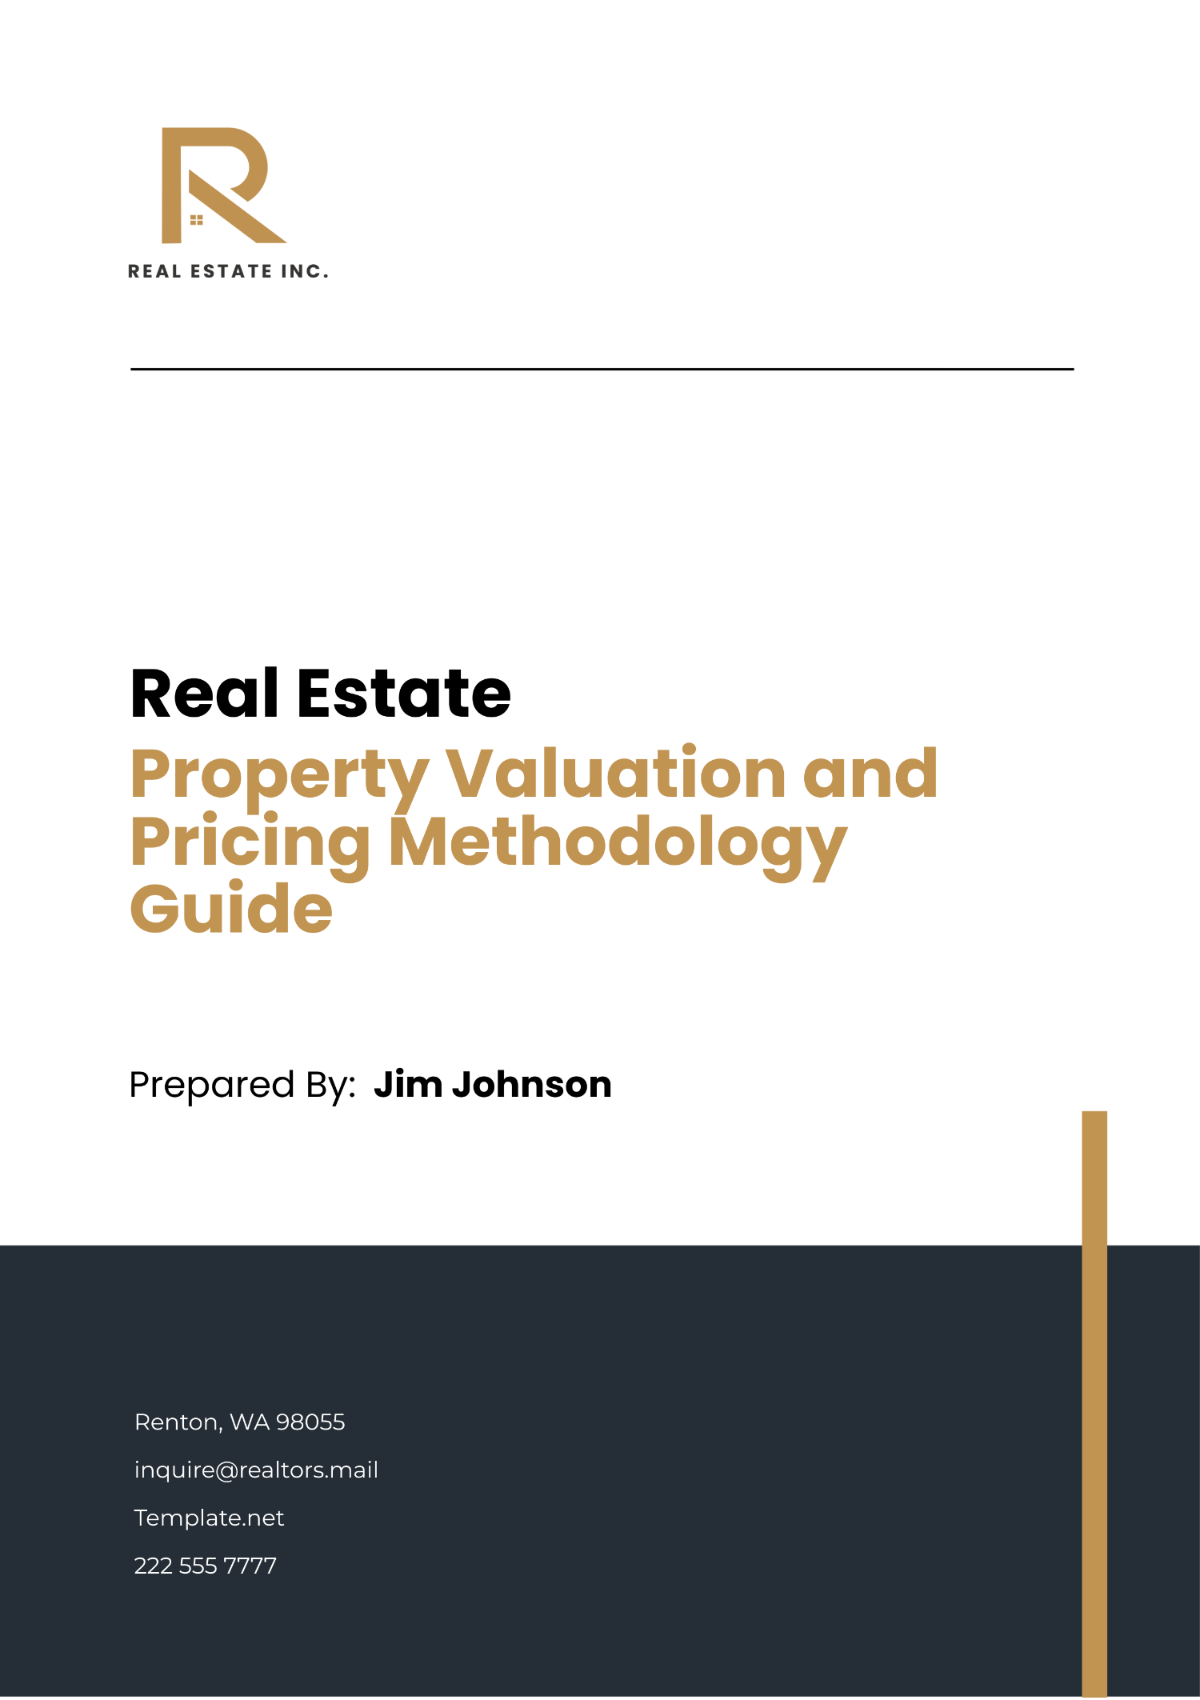 Free Real Estate Property Valuation and Pricing Methodology Guide Template